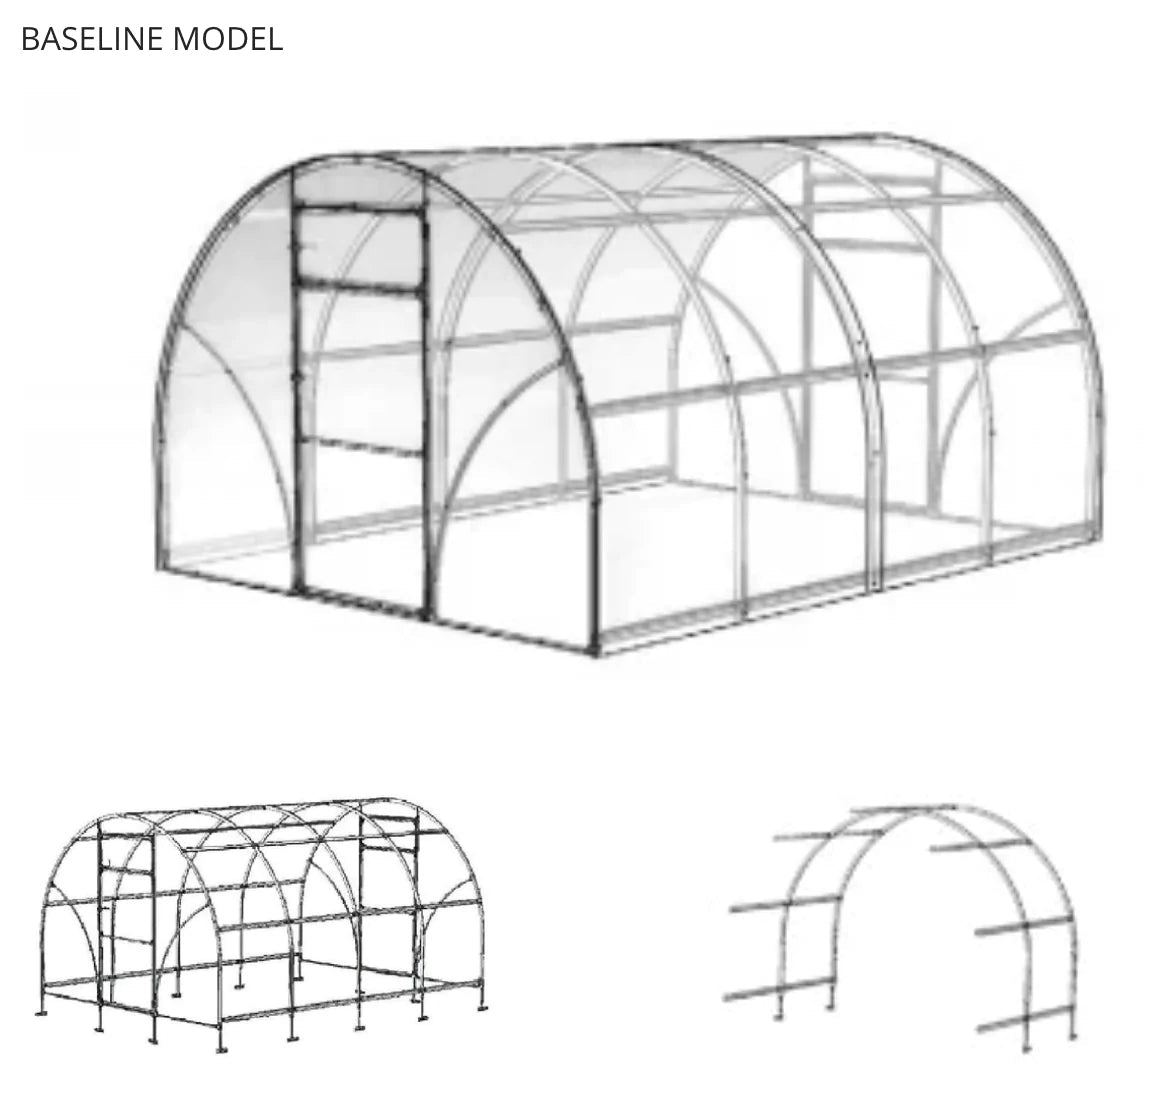 Greenhouse Accessories - Sigma™ Greenhouse Extension Kit